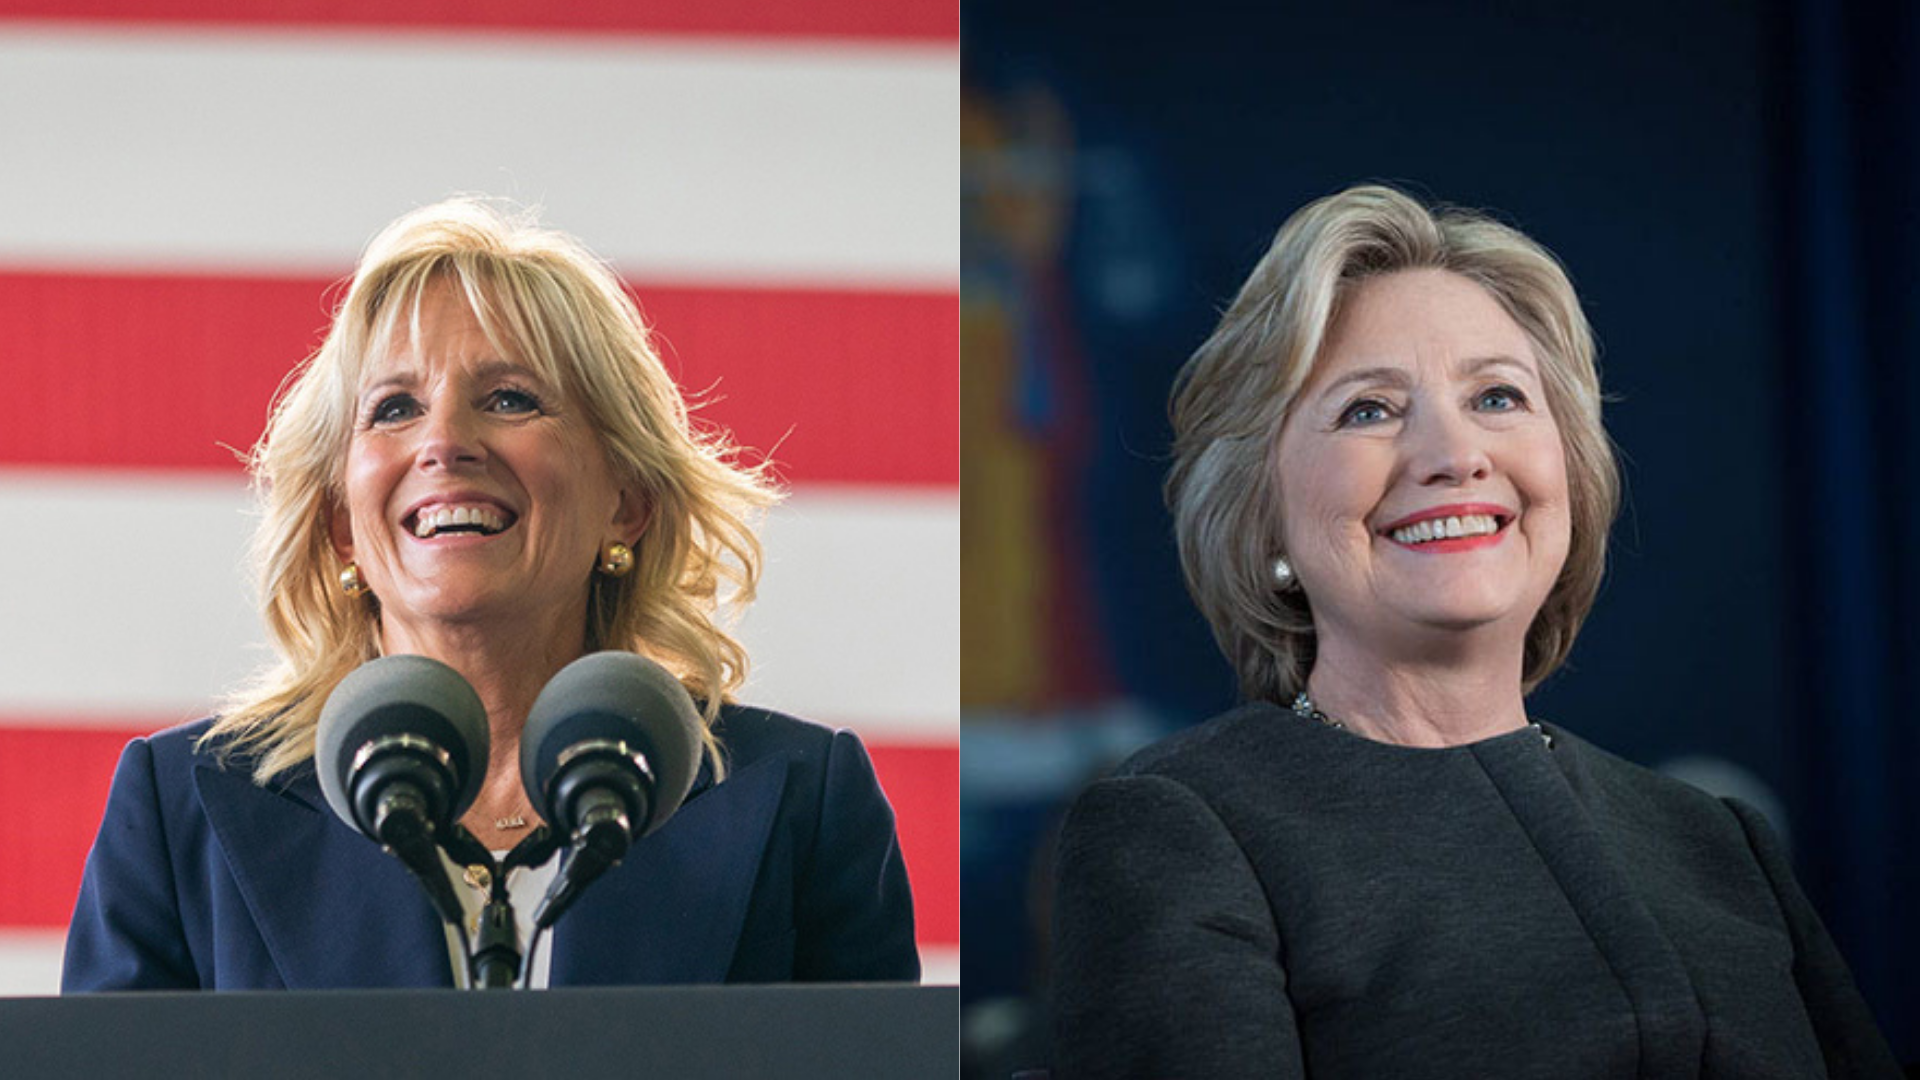 Jill Biden speaks into a microphone on left and Hillary Clinton smiles on the right